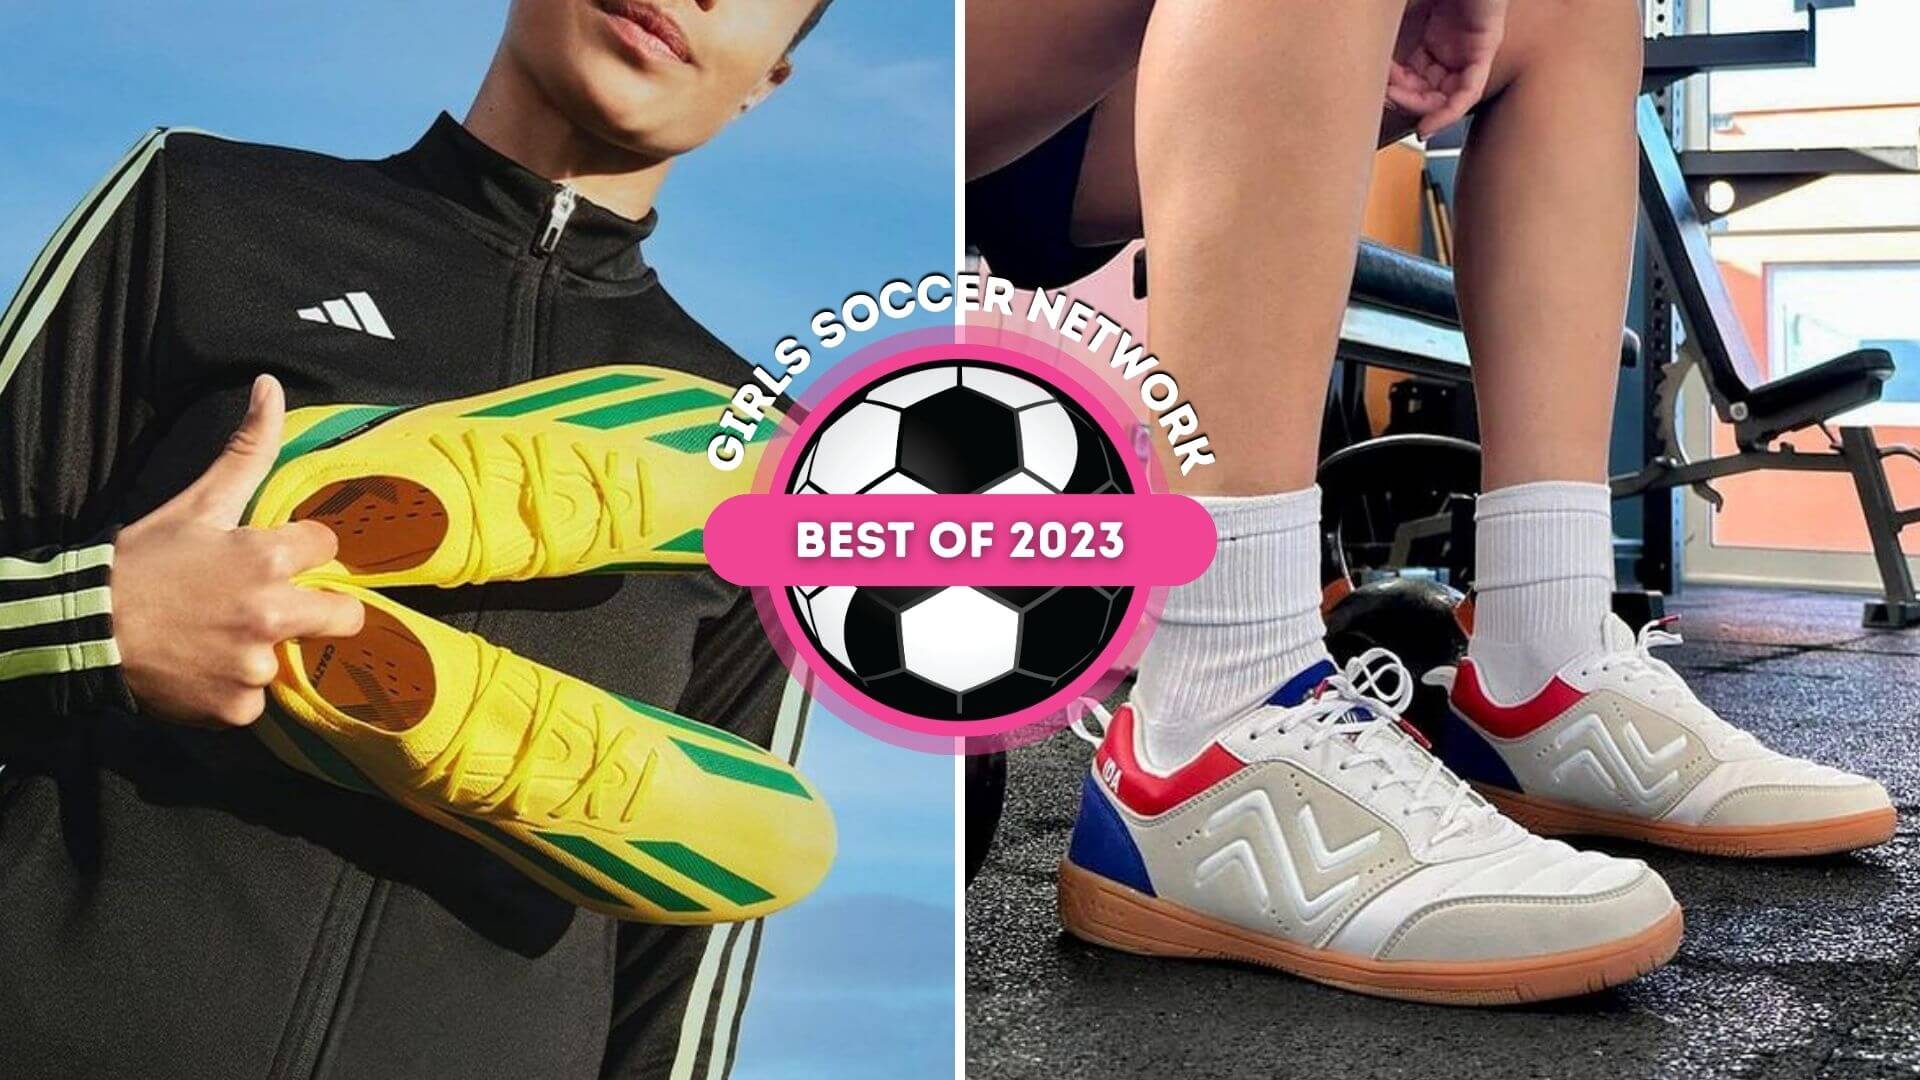 The best girls soccer cleats of 2023